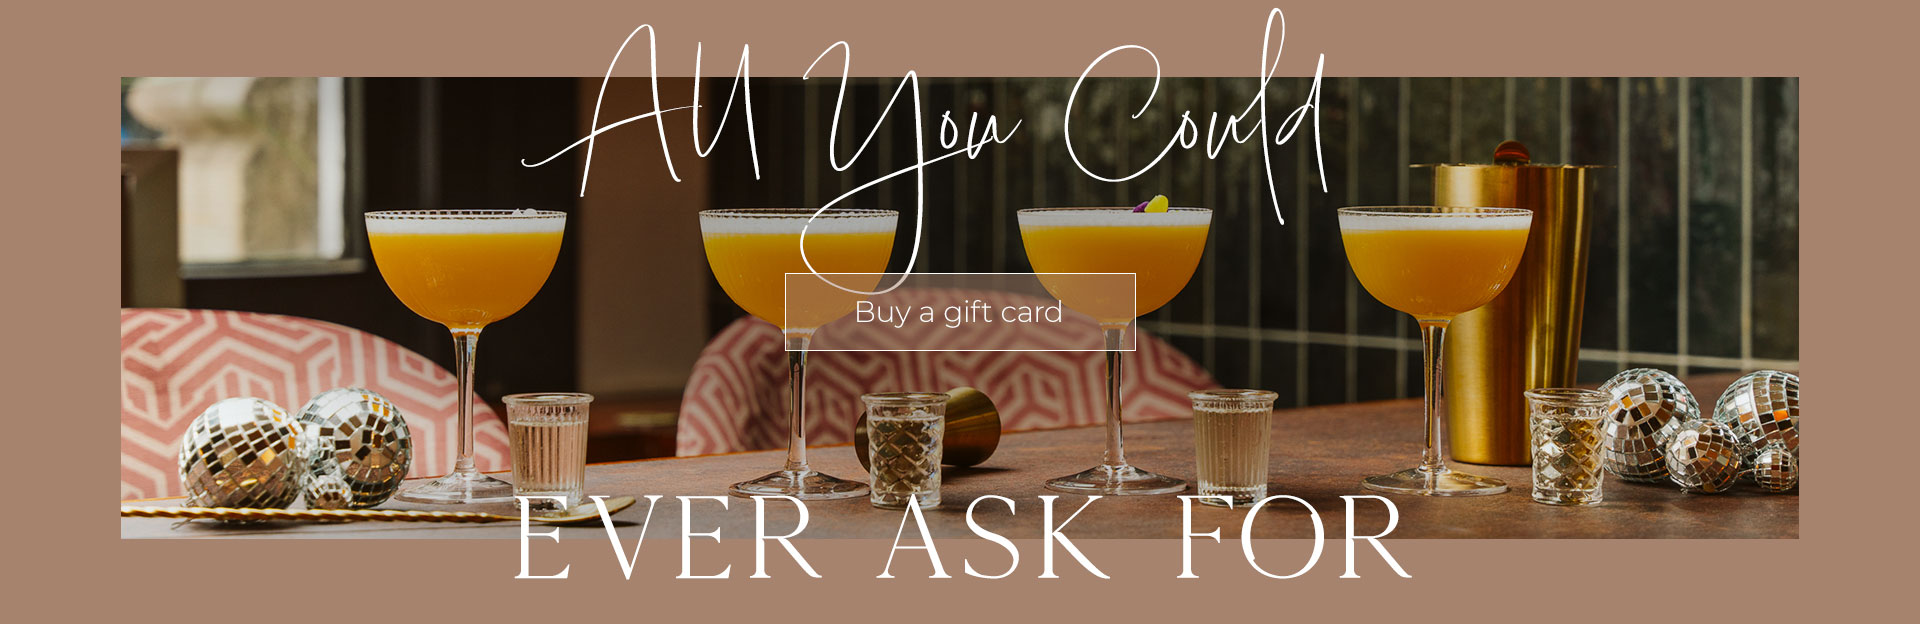 All Bar One Gift Cards at All Bar One Oxford